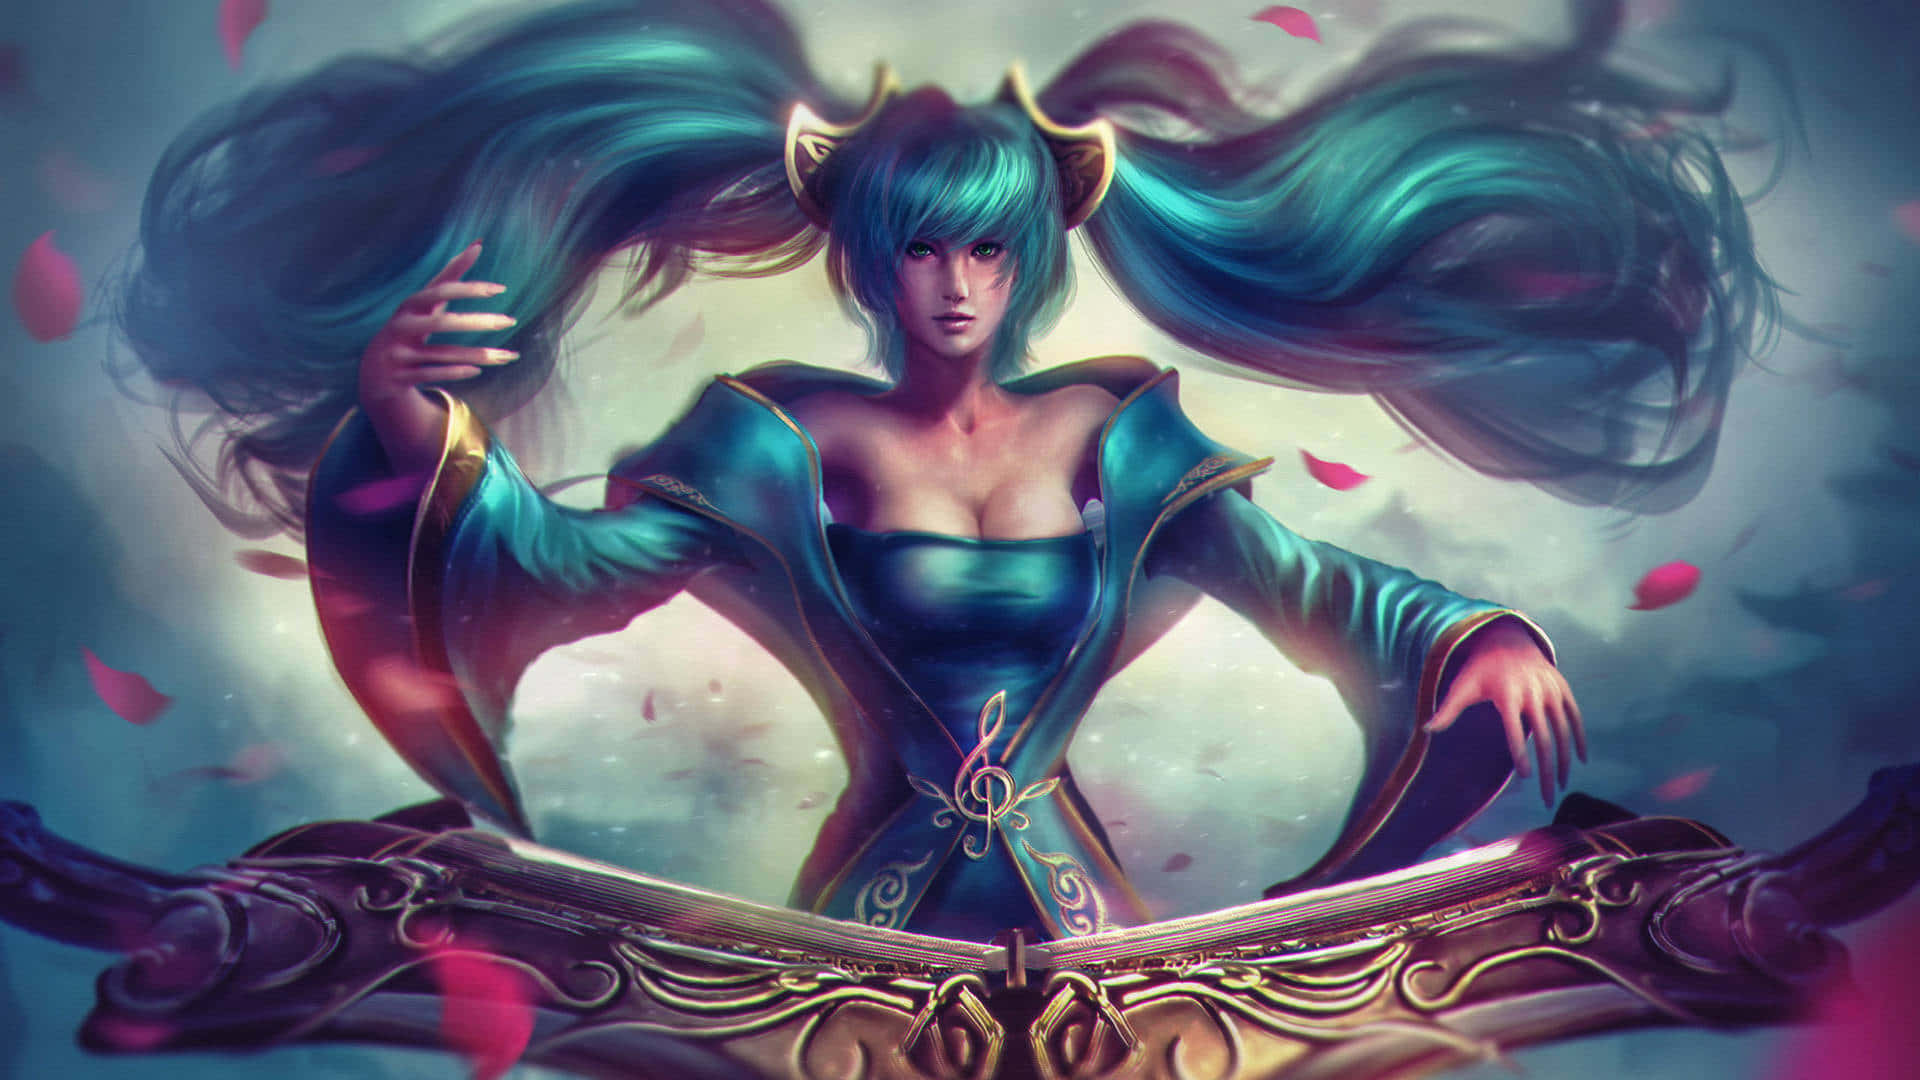 Customize Your League Of Legends Experience with a New Laptop Wallpaper